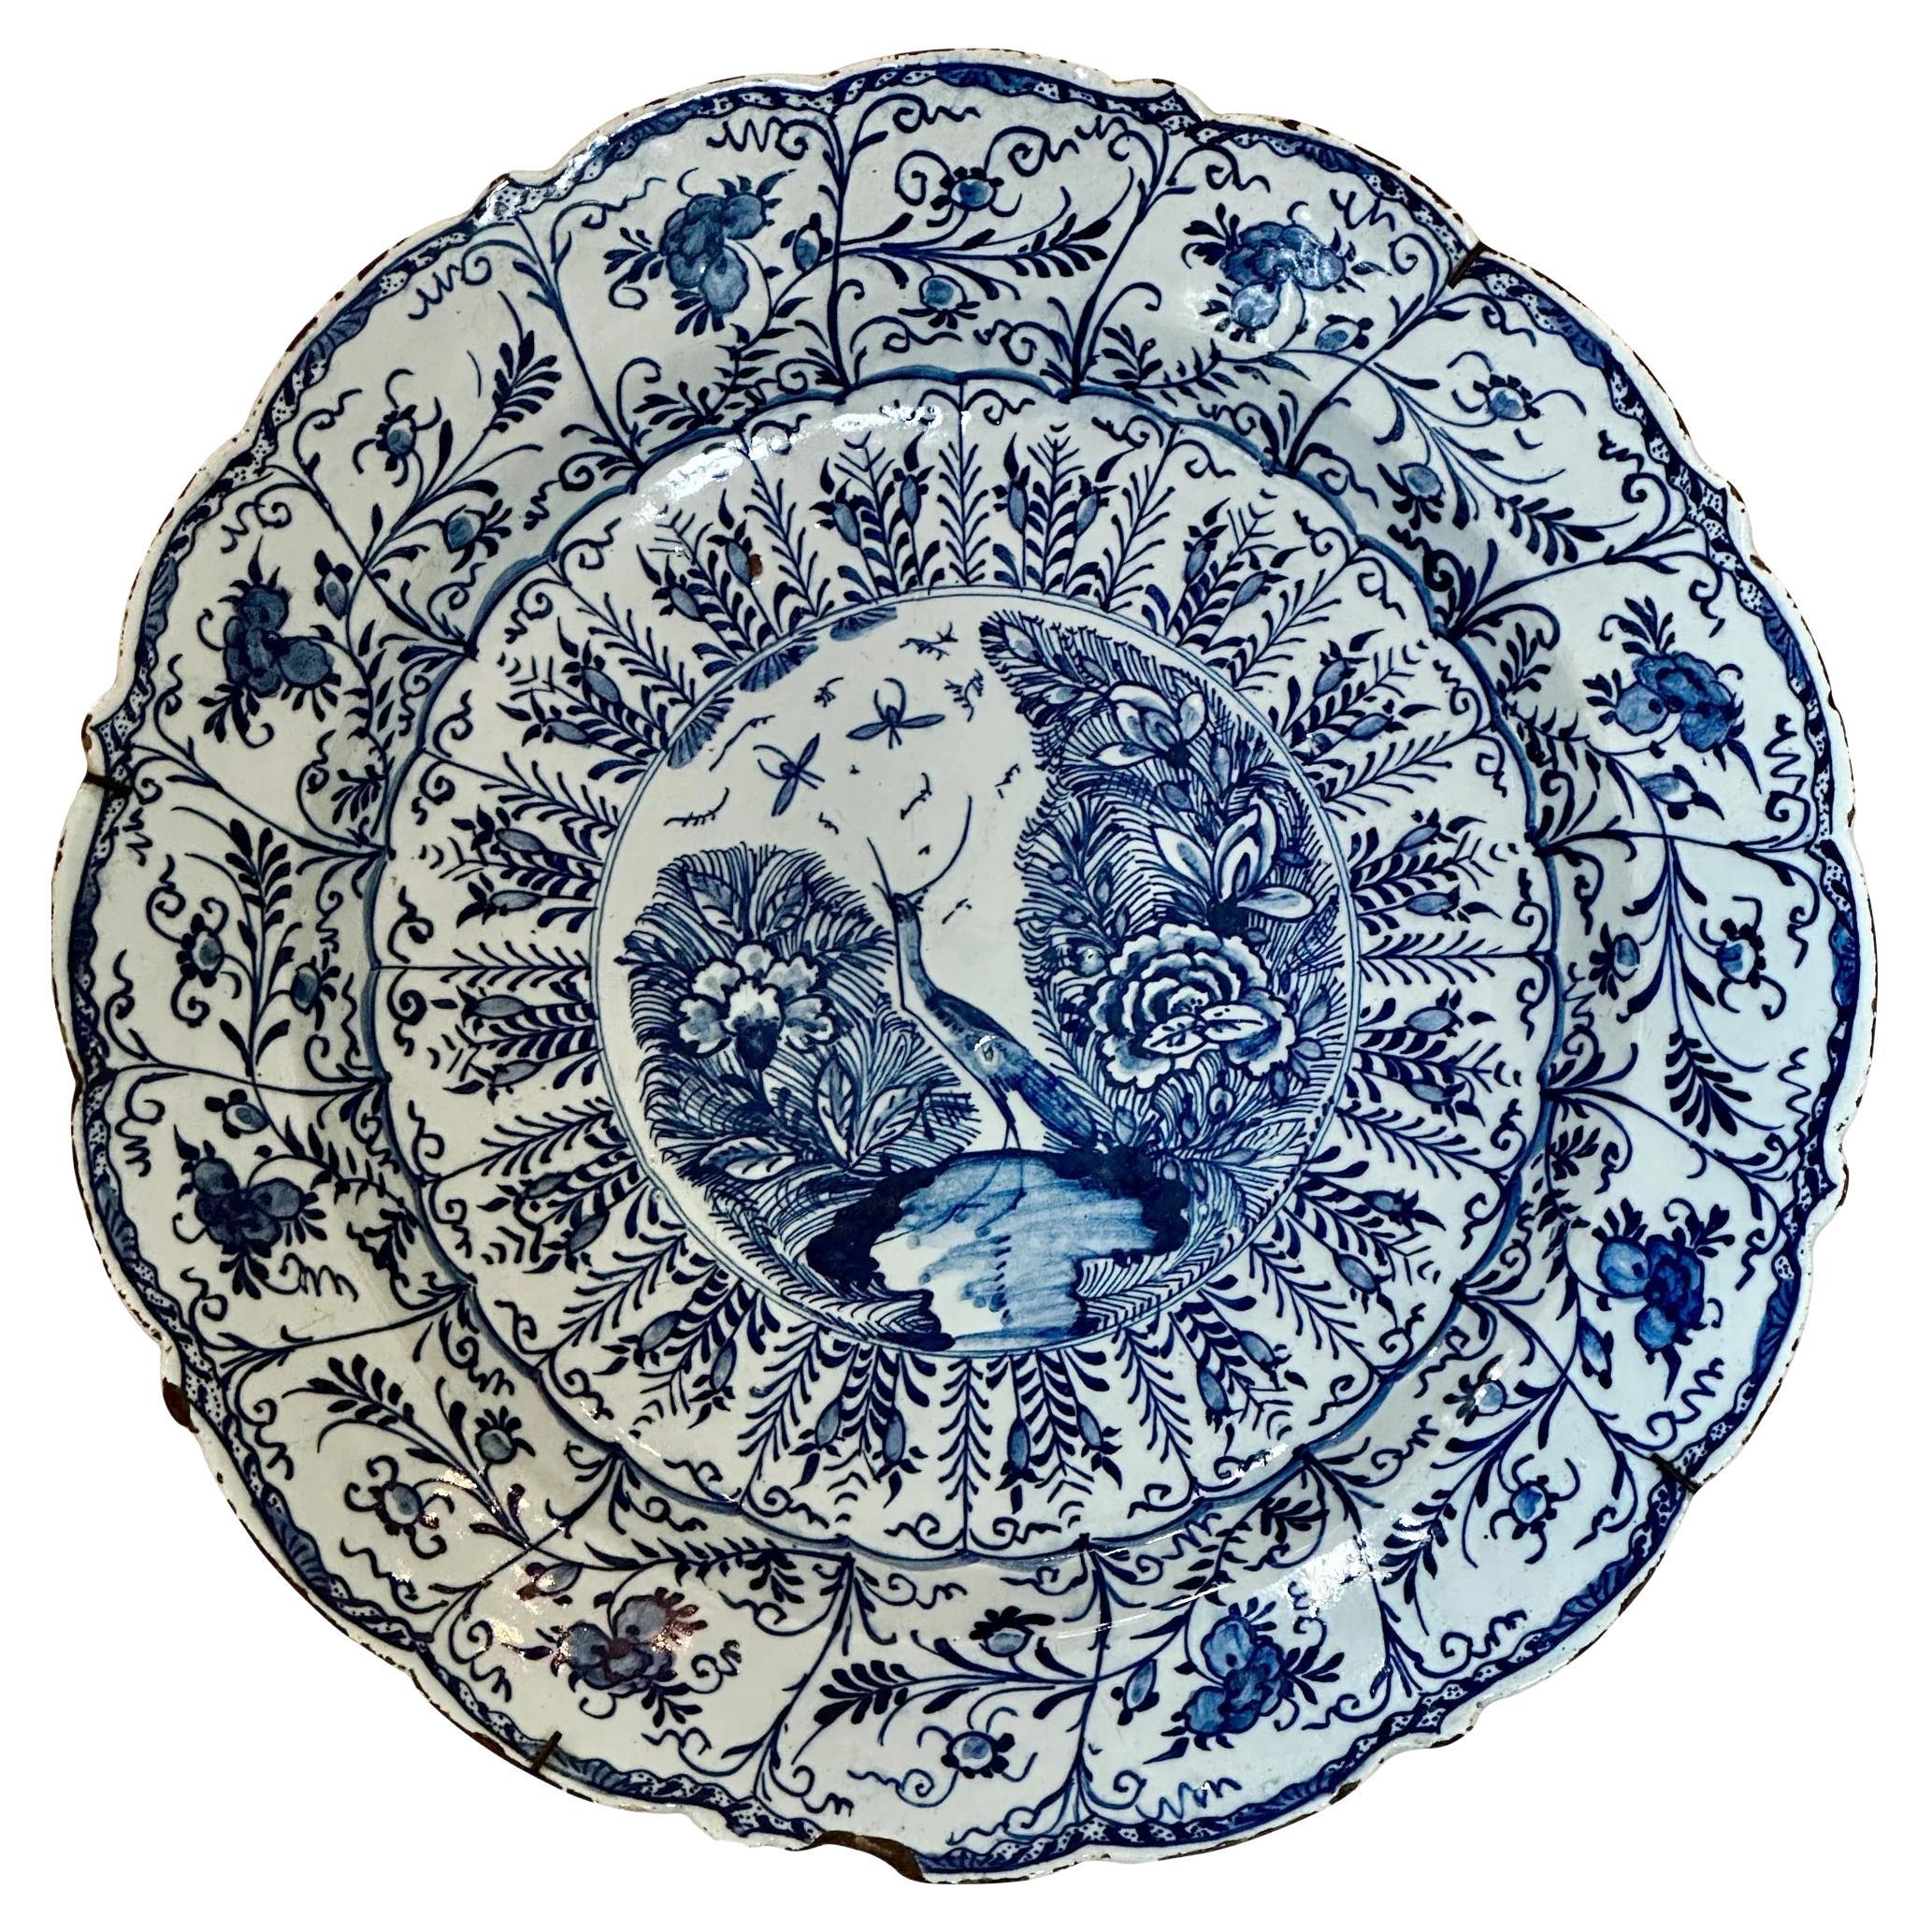 Scalloped Blue and White Delft Charger with Crane & Floral Decoration, 18th Cent